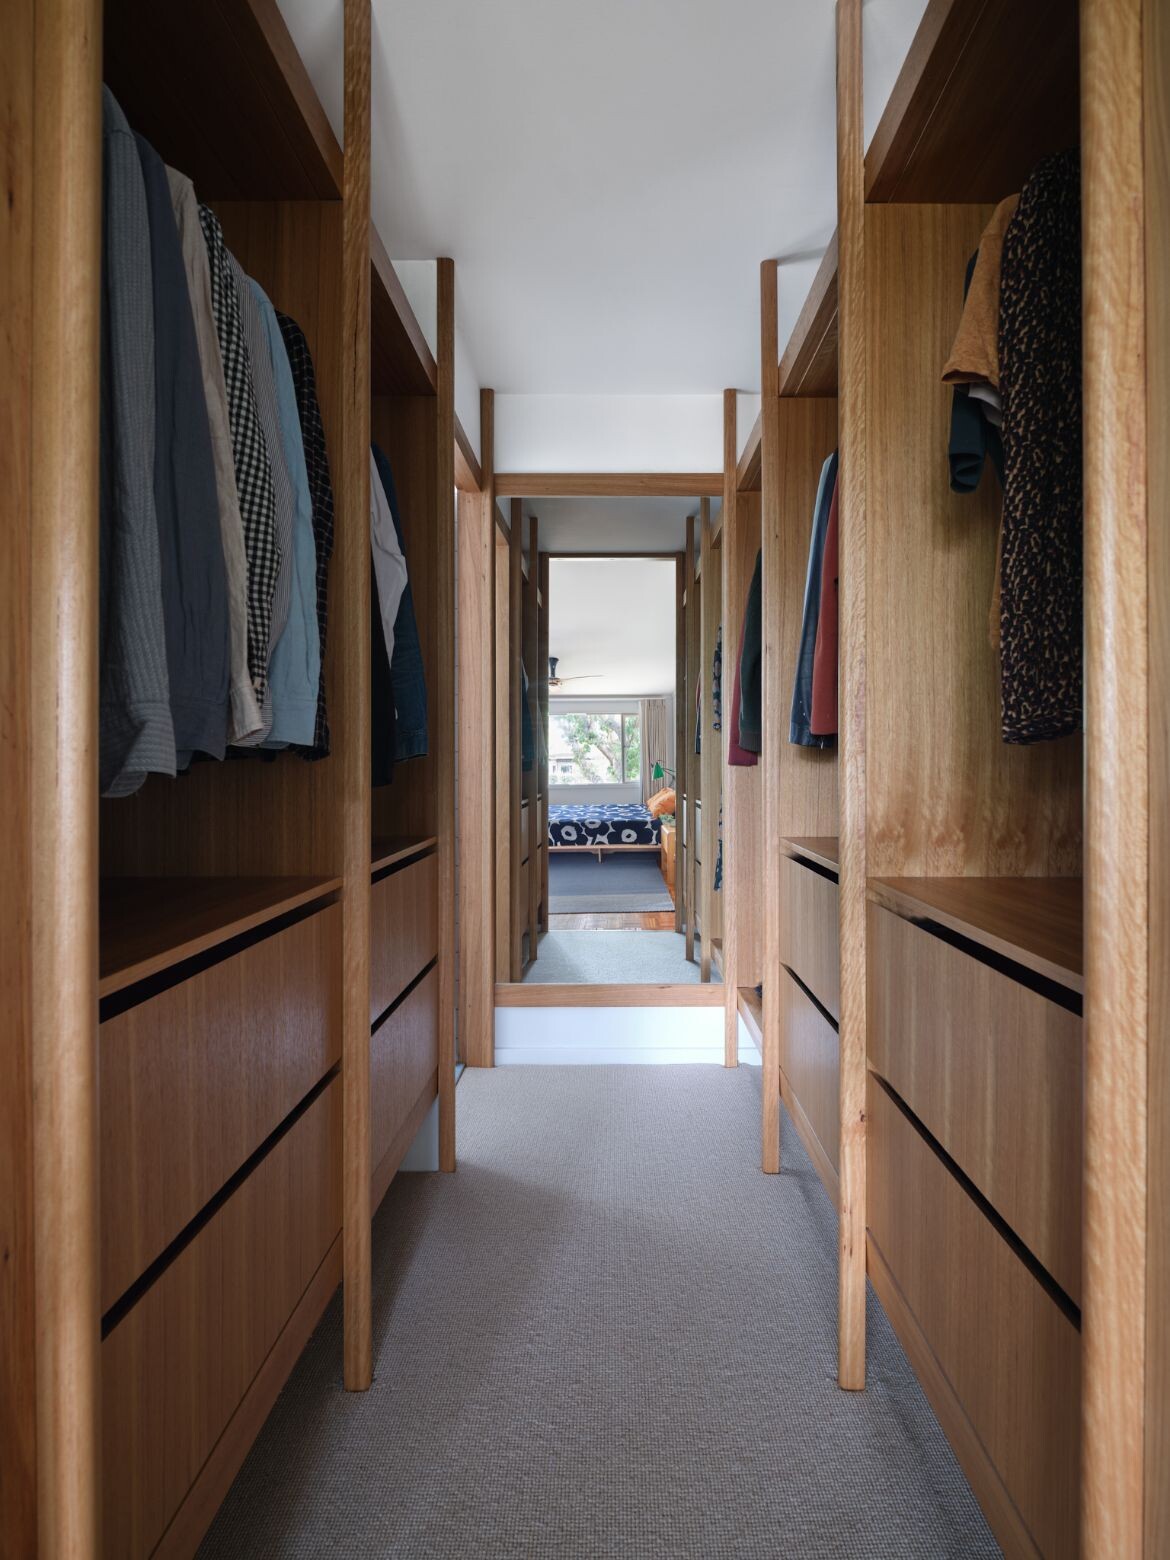 A big walk-in robe features carpet underfoot